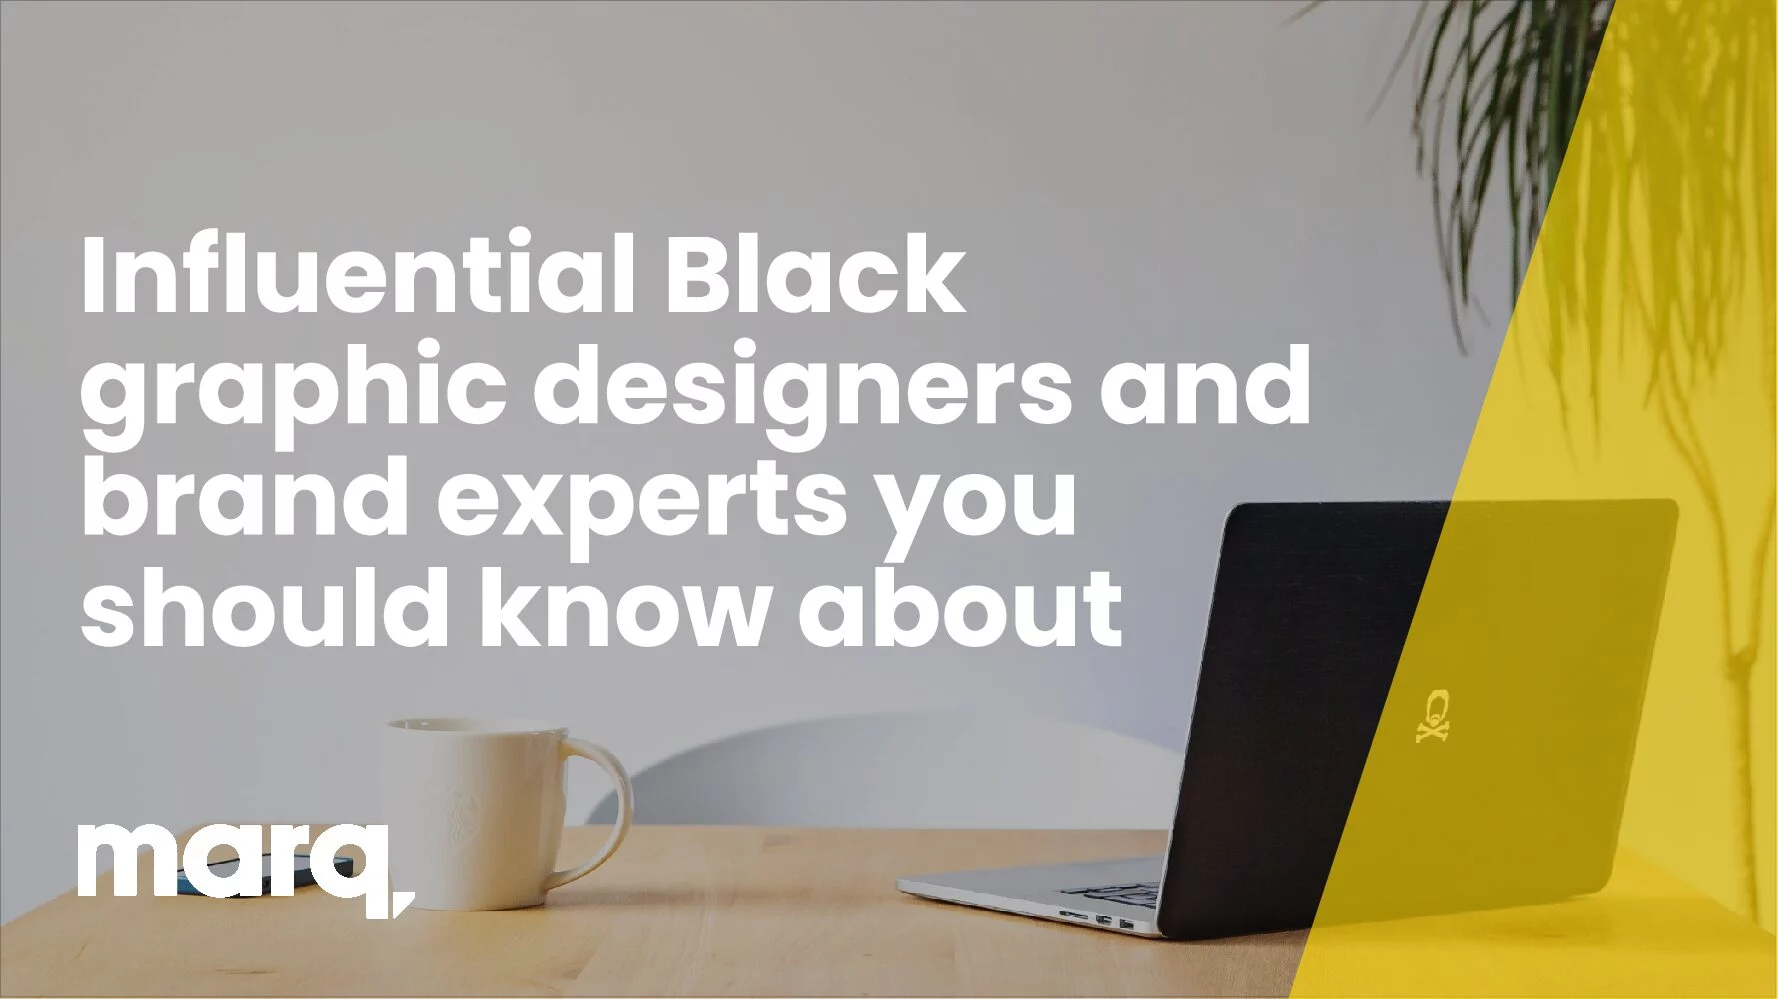 Influential Black graphic designers and brand experts you should know about